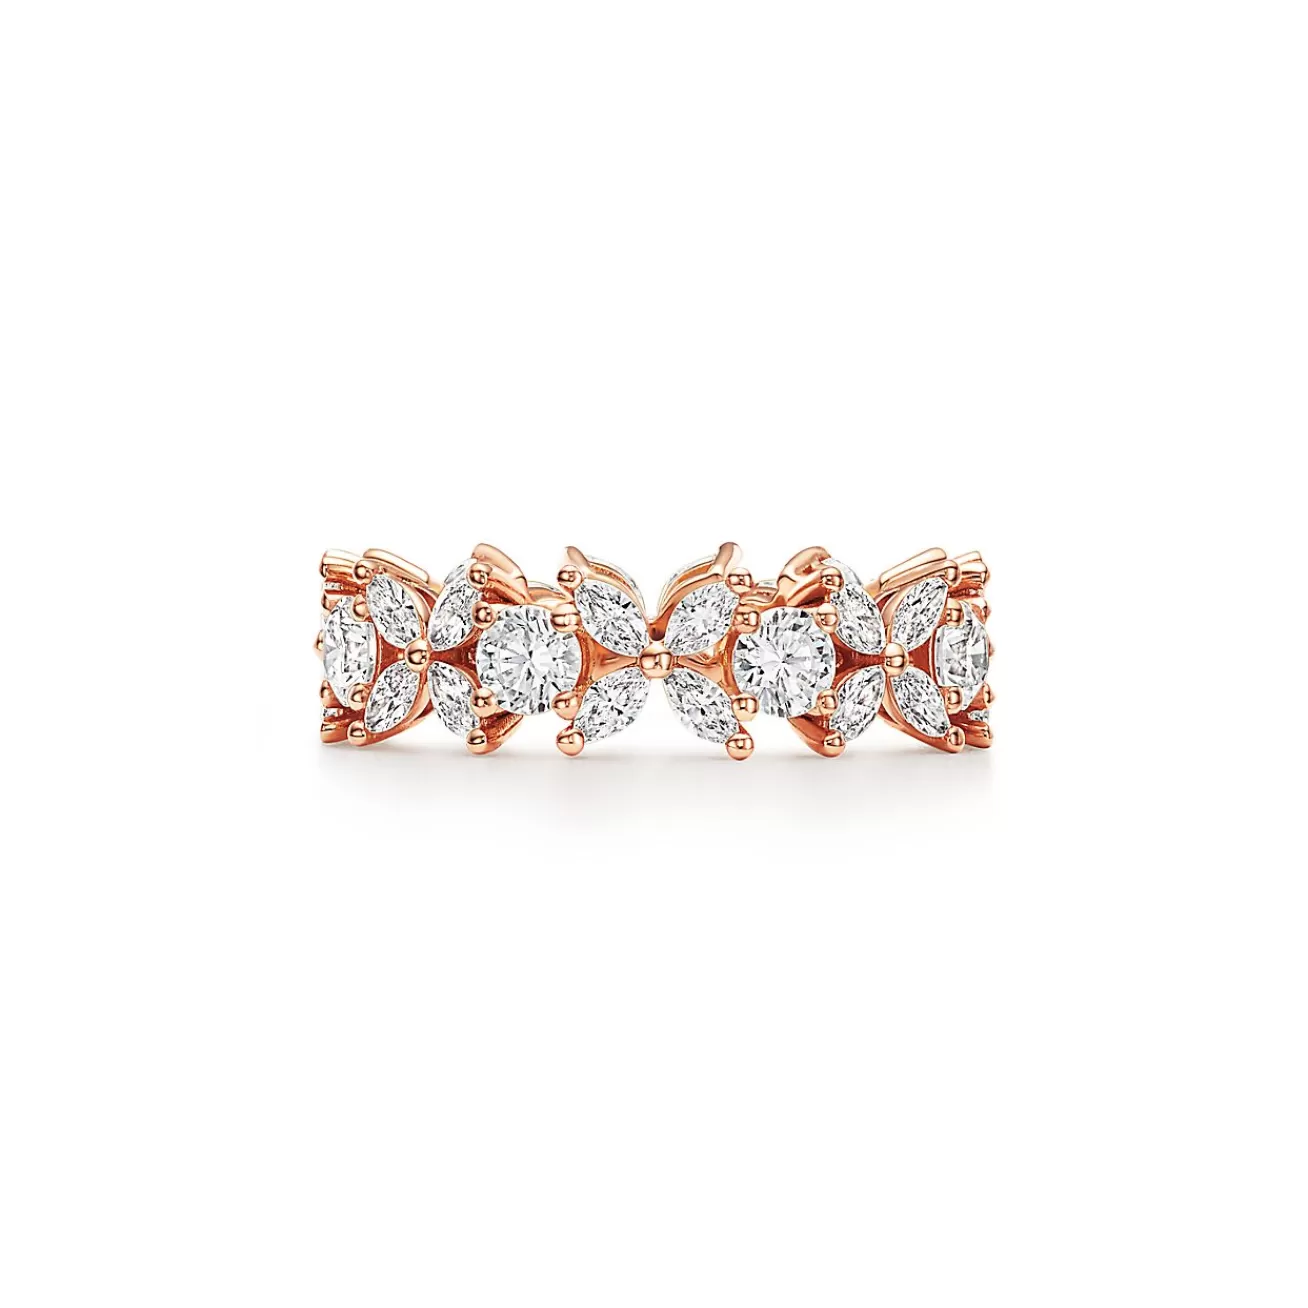 Tiffany & Co. Tiffany Victoria® alternating diamond band ring in 18k rose gold. | ^ Rings | Stacking Rings